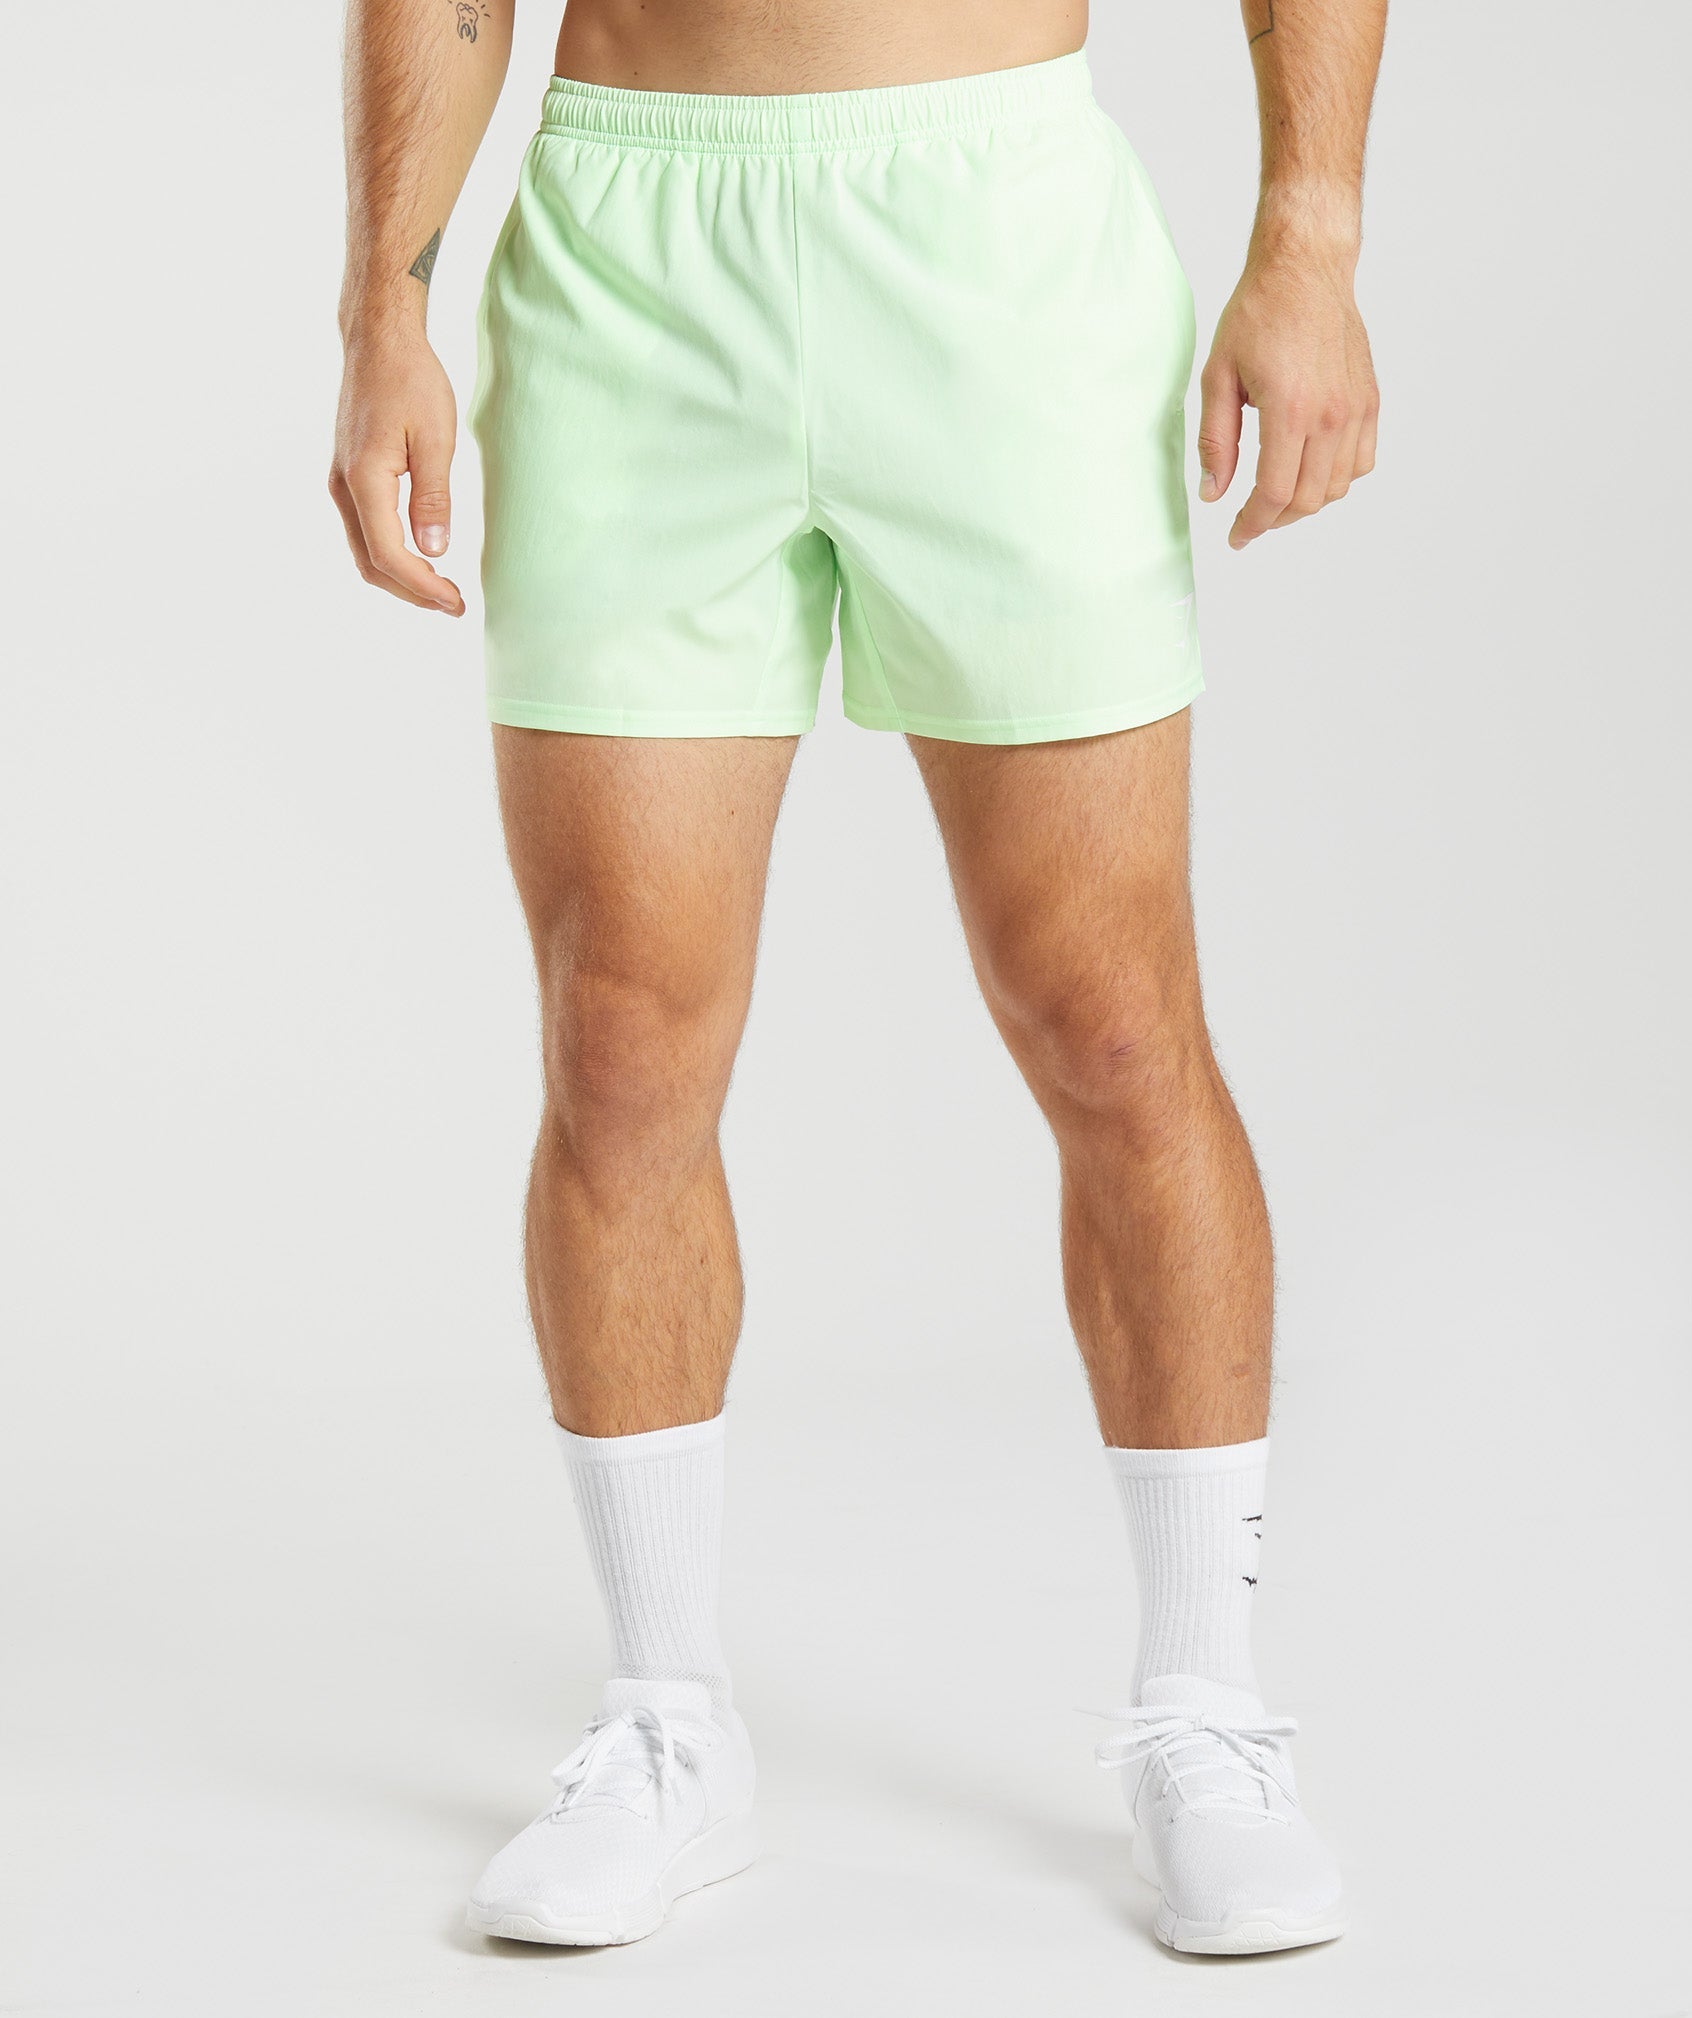 Arrival 5" Shorts in Fluo Mint - view 1